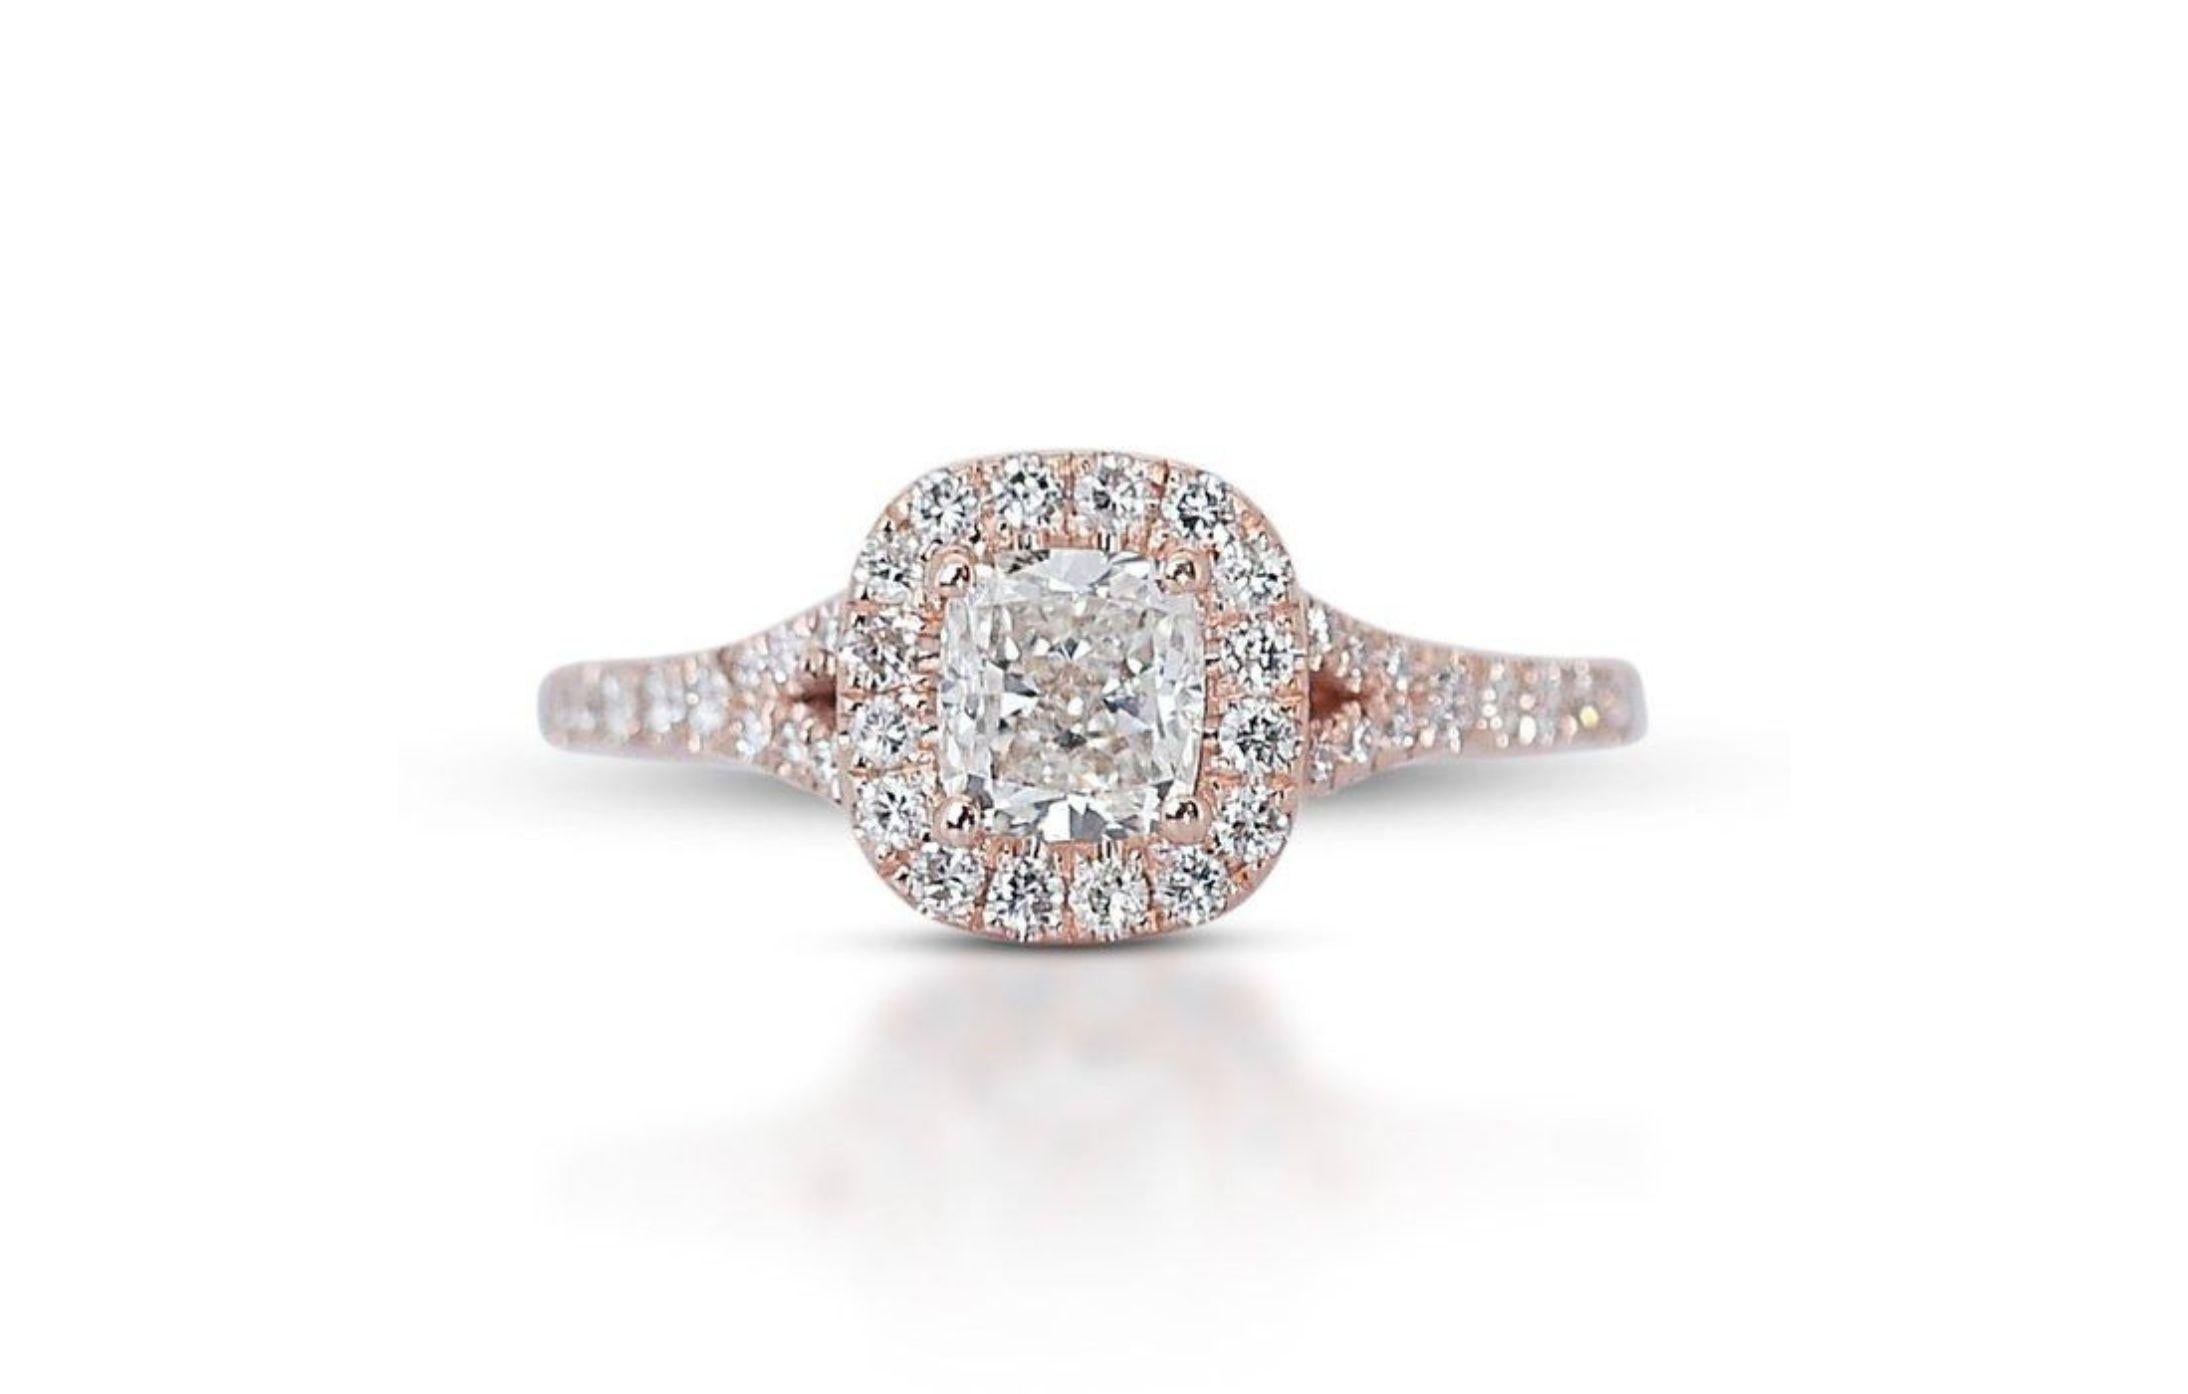 Prepare to be captivated by a ring that whispers tales of blushing rose petals kissed by morning dew. This breathtaking creation features a dazzling 0.7 carat cushion-cut diamond, its G color radiating pure, luminous beauty with a hint of romantic